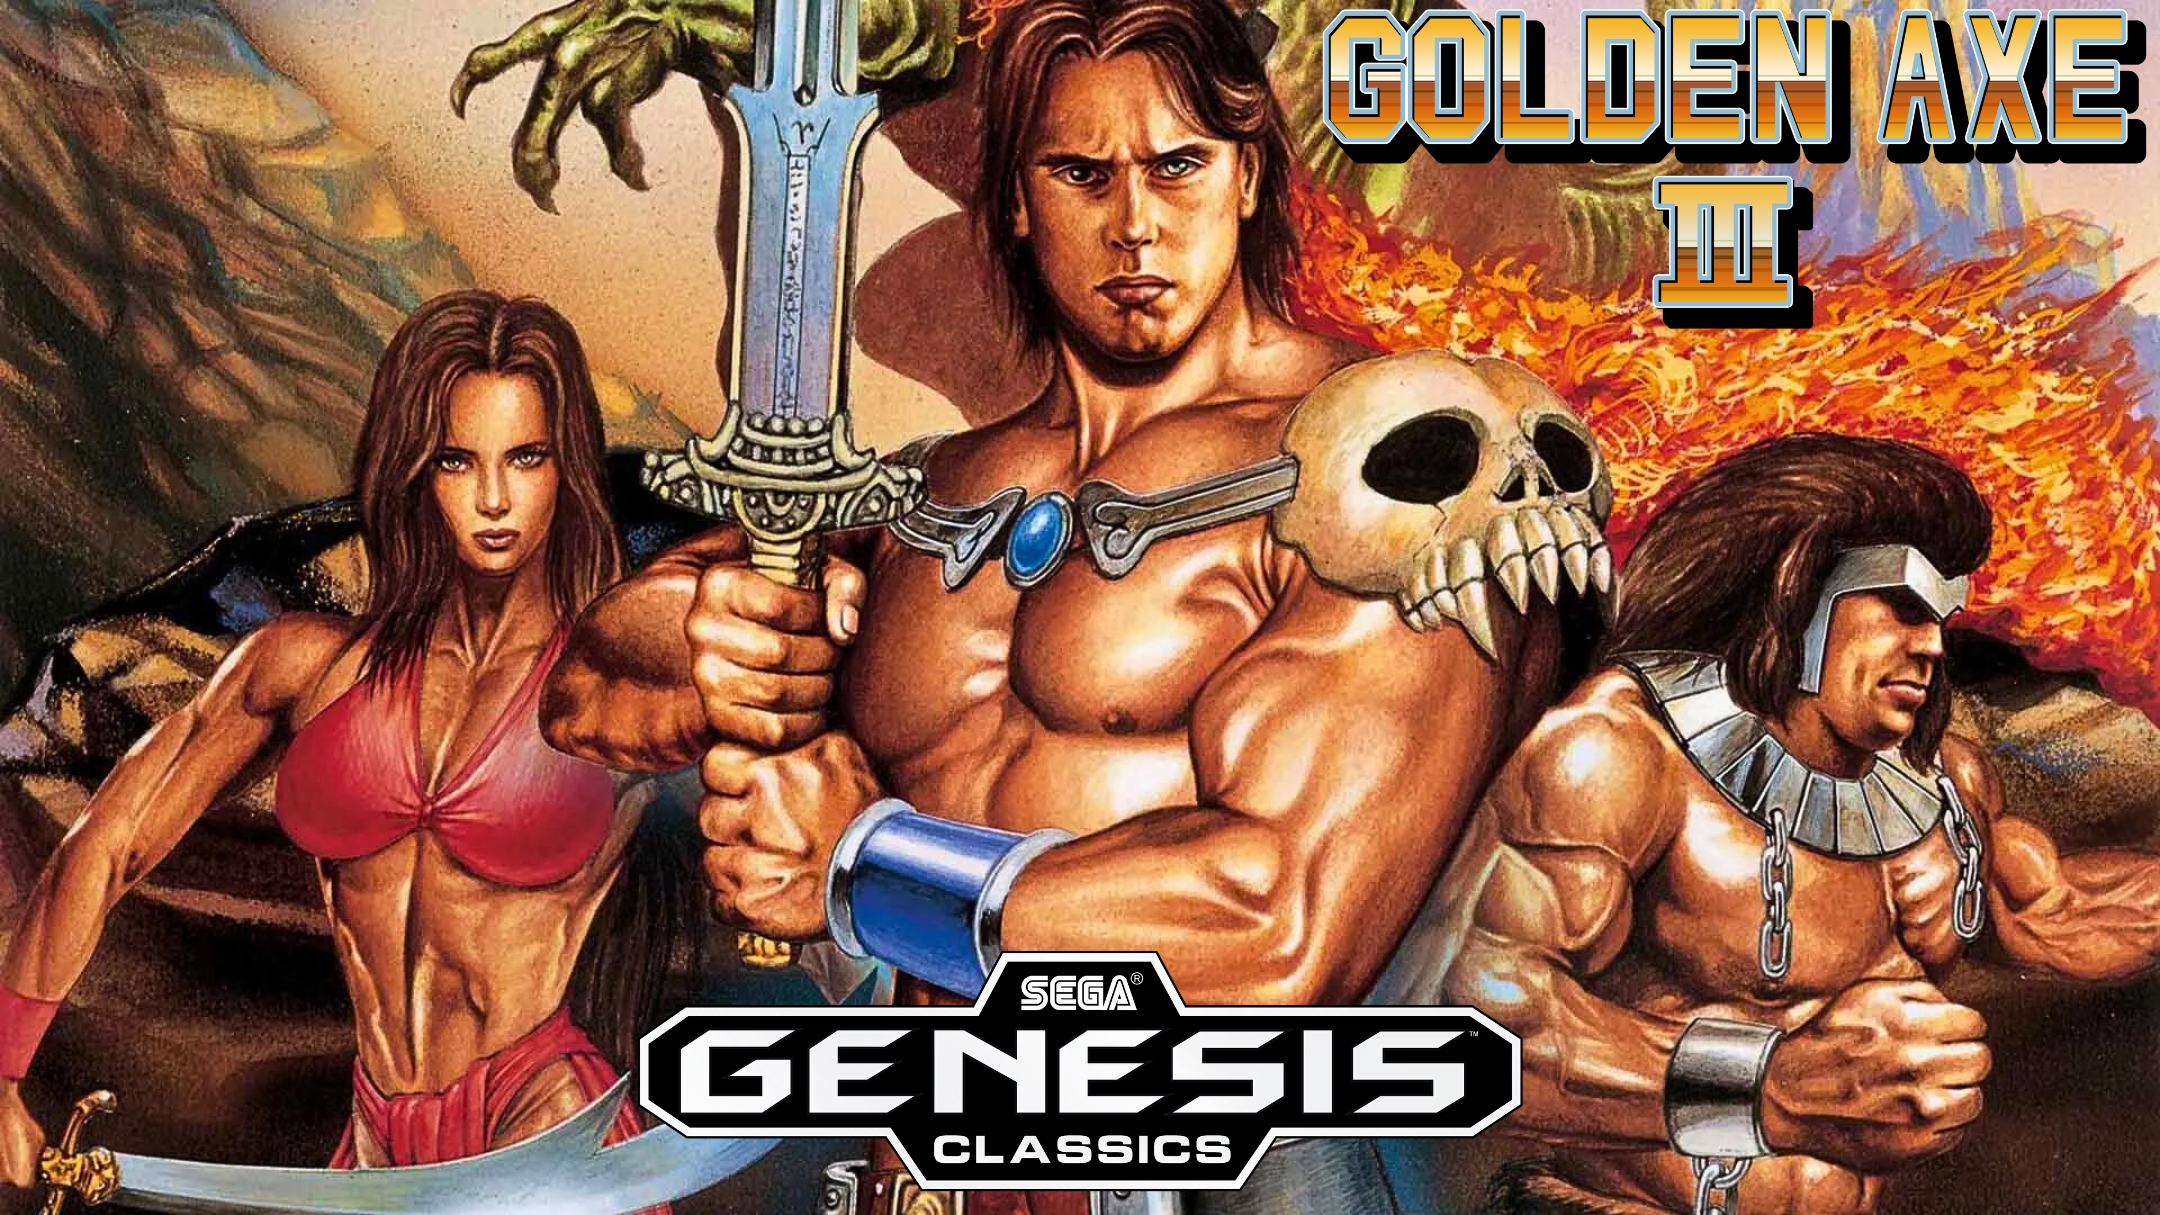 Golden Axe 3: Quest of Legends 1993 – Master the Battle on Customary Mode !